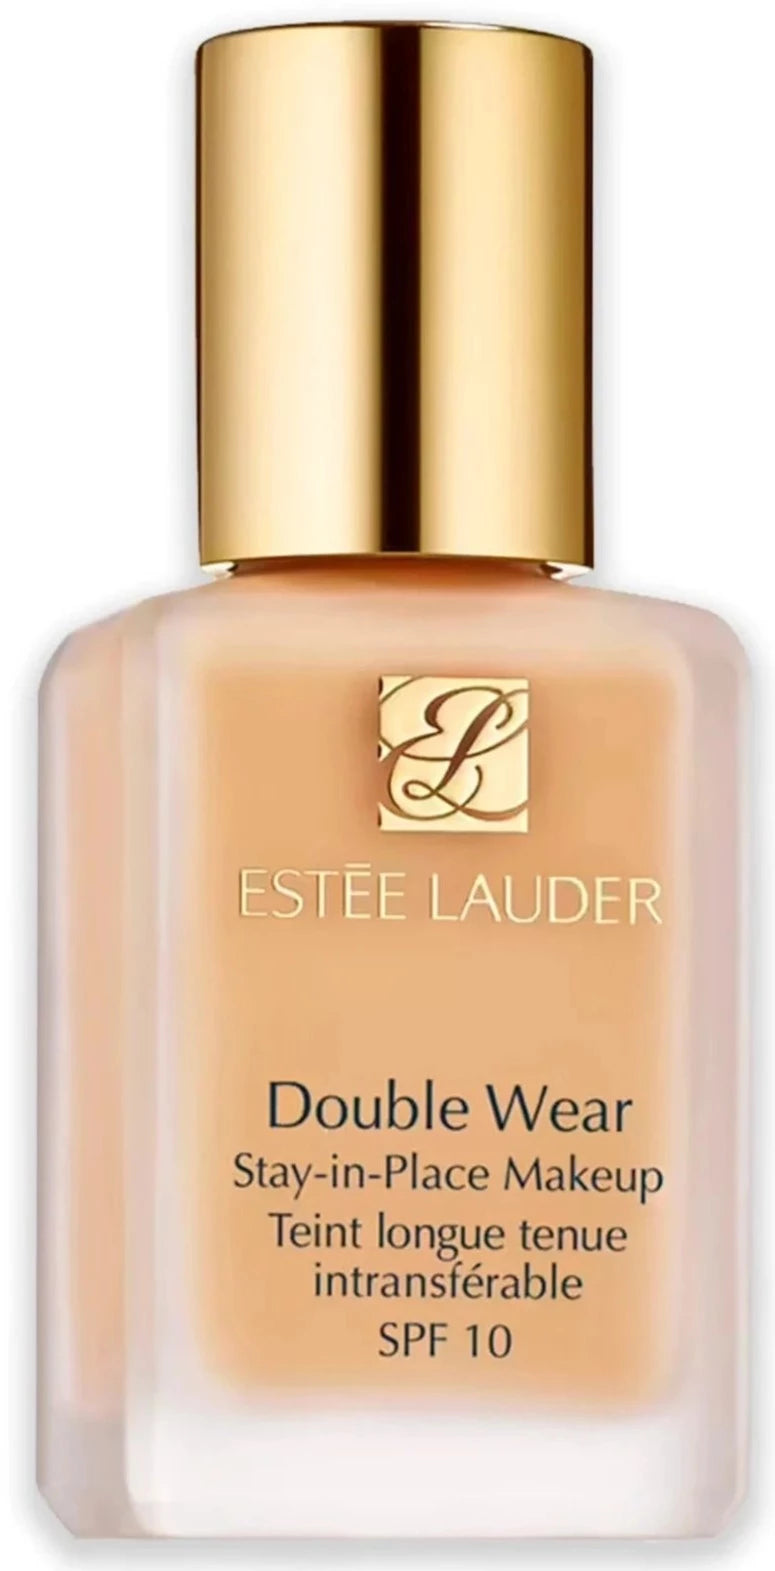 ESTEE LAUDER DOUBLE WEAR STAY-IN-PLACE MAKEUP SPF 10 SHADE 72 1N1-IVORY NUDE 30ML